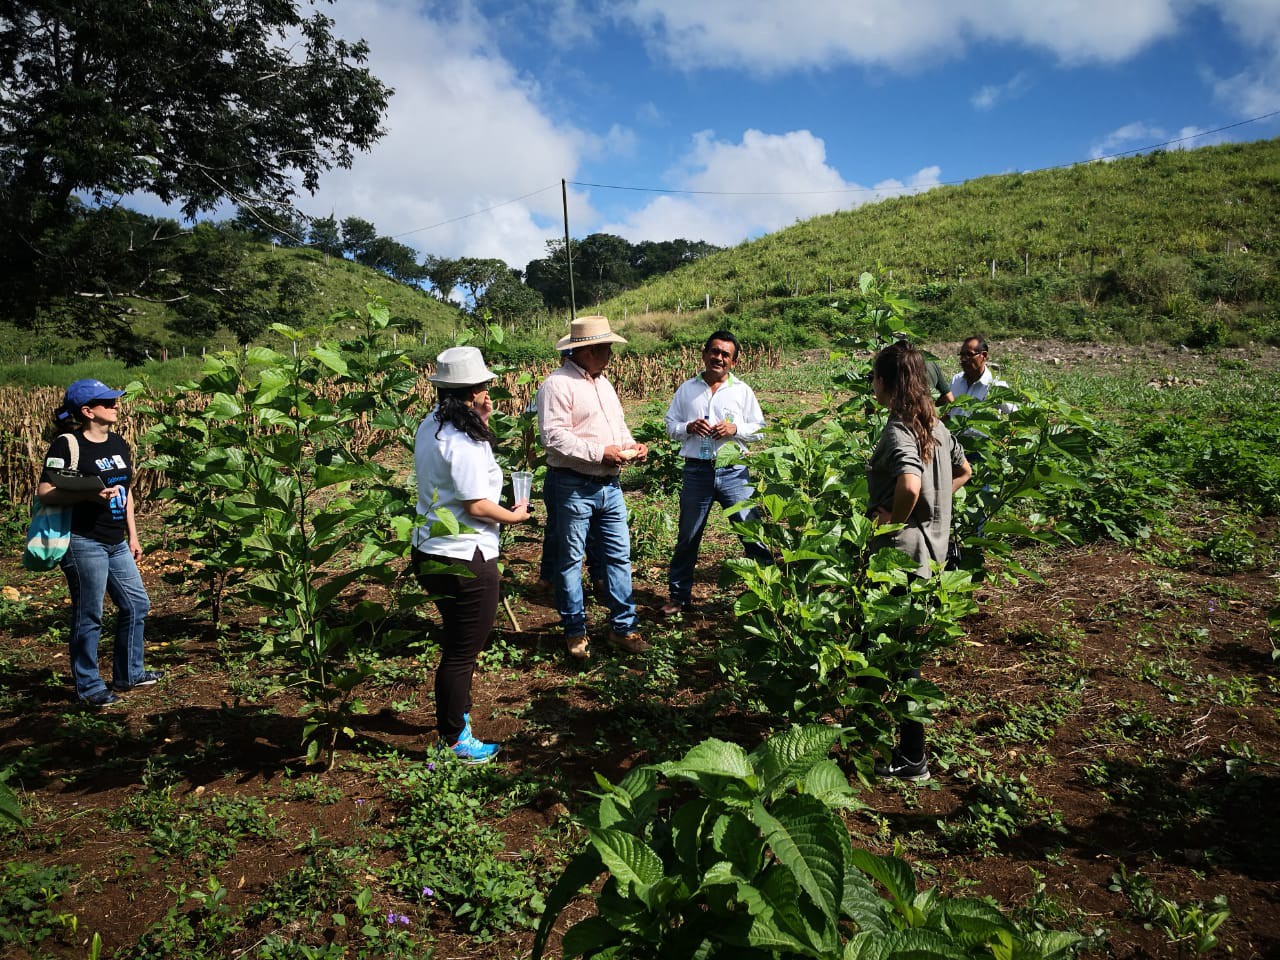 Nurturing nature: Identifying Ecosystem-based Adaptation (EbA) initiatives to build social and political support for EbA upscaling in Guatemala